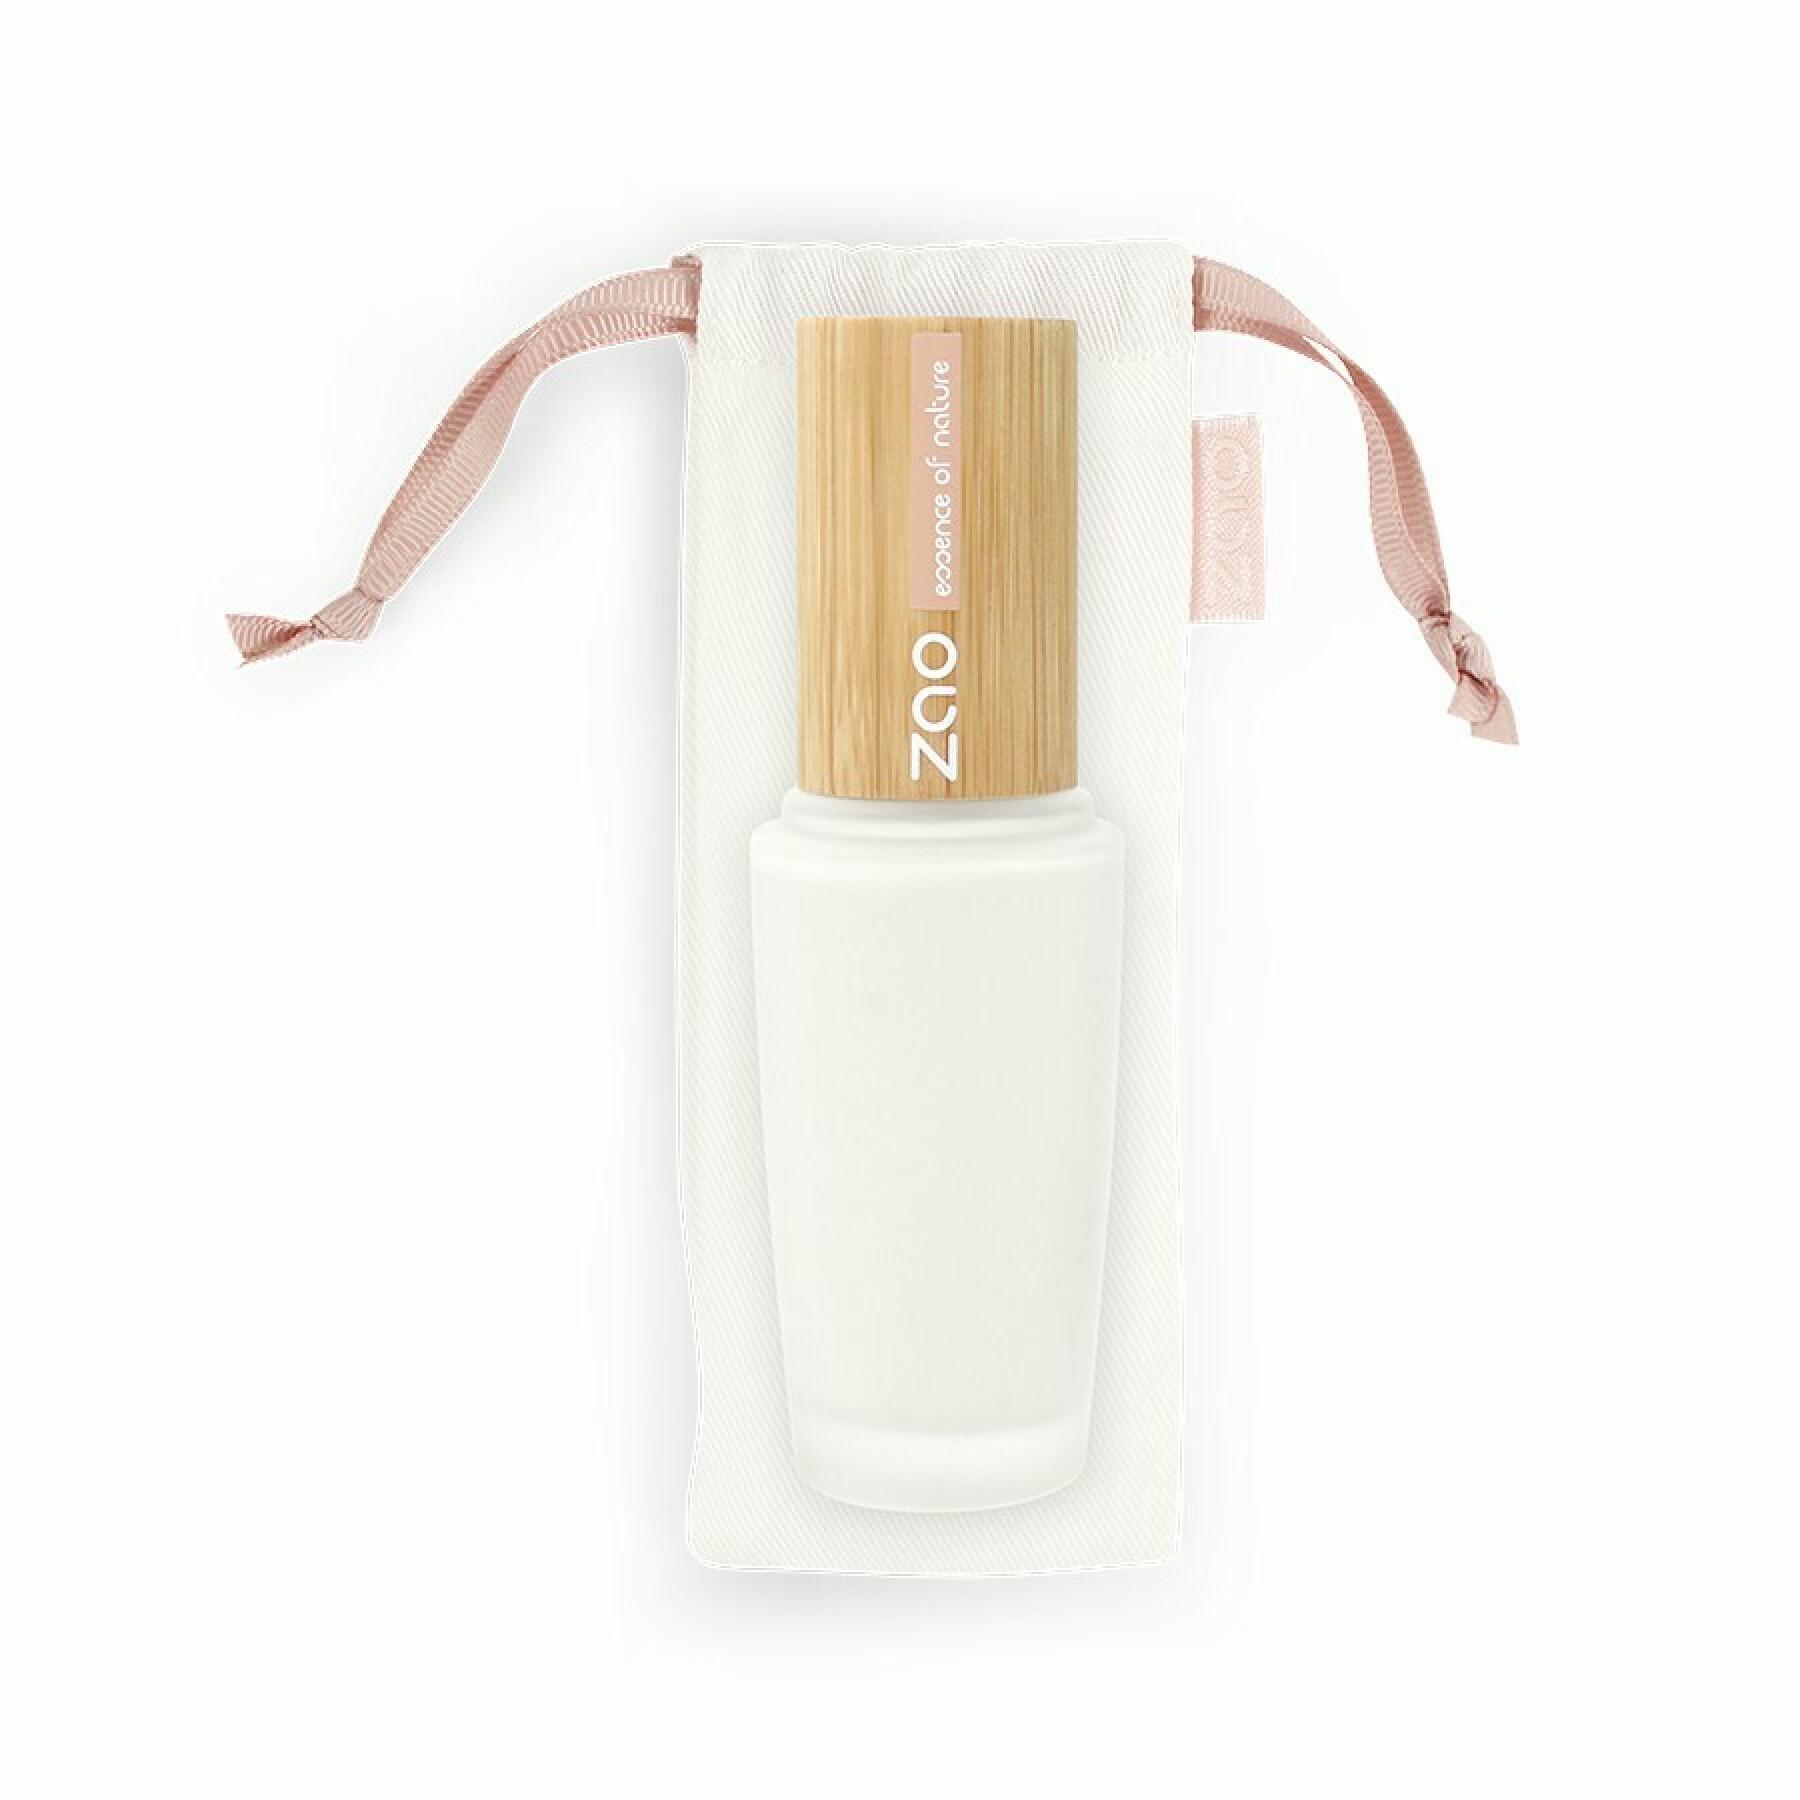 Mattifying and smoothing foundation for women Zao Prim'Soft - 30 ml